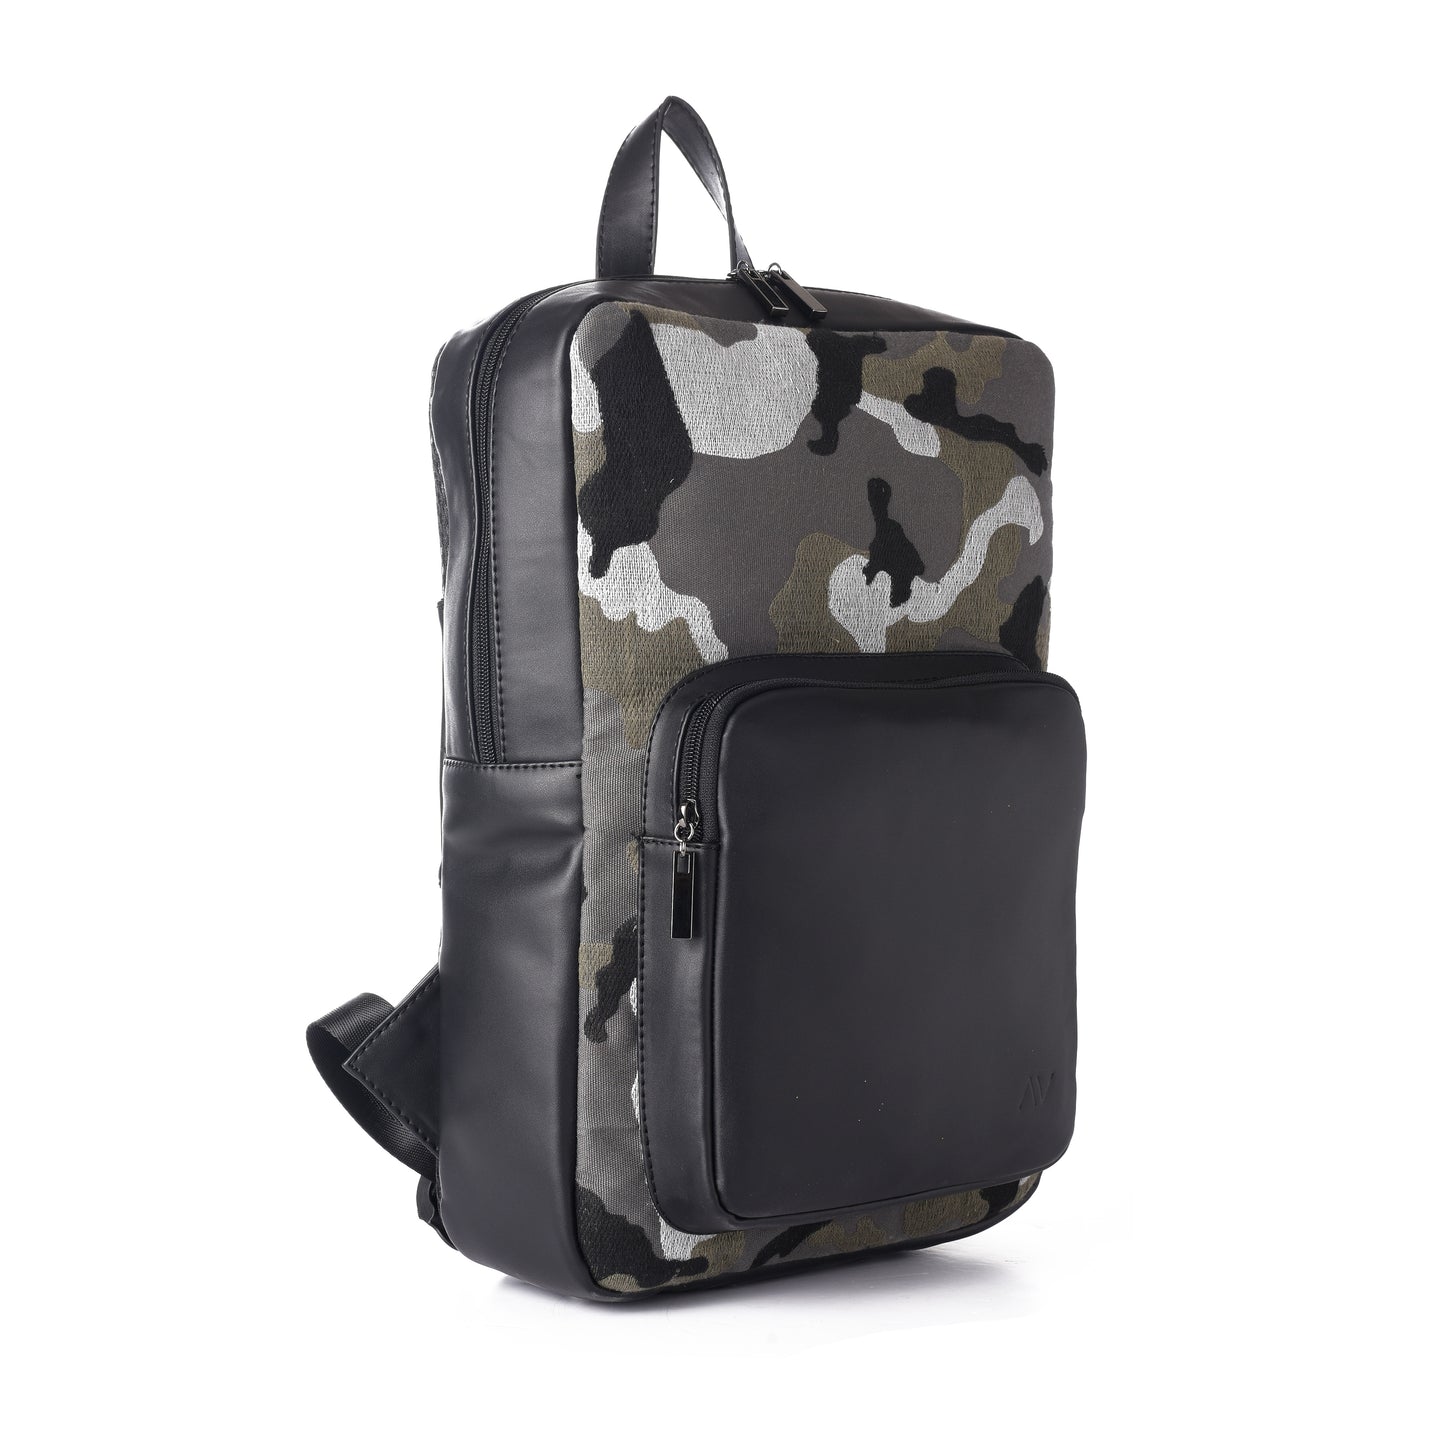 Laptop black with Olive Army pattern Backpack